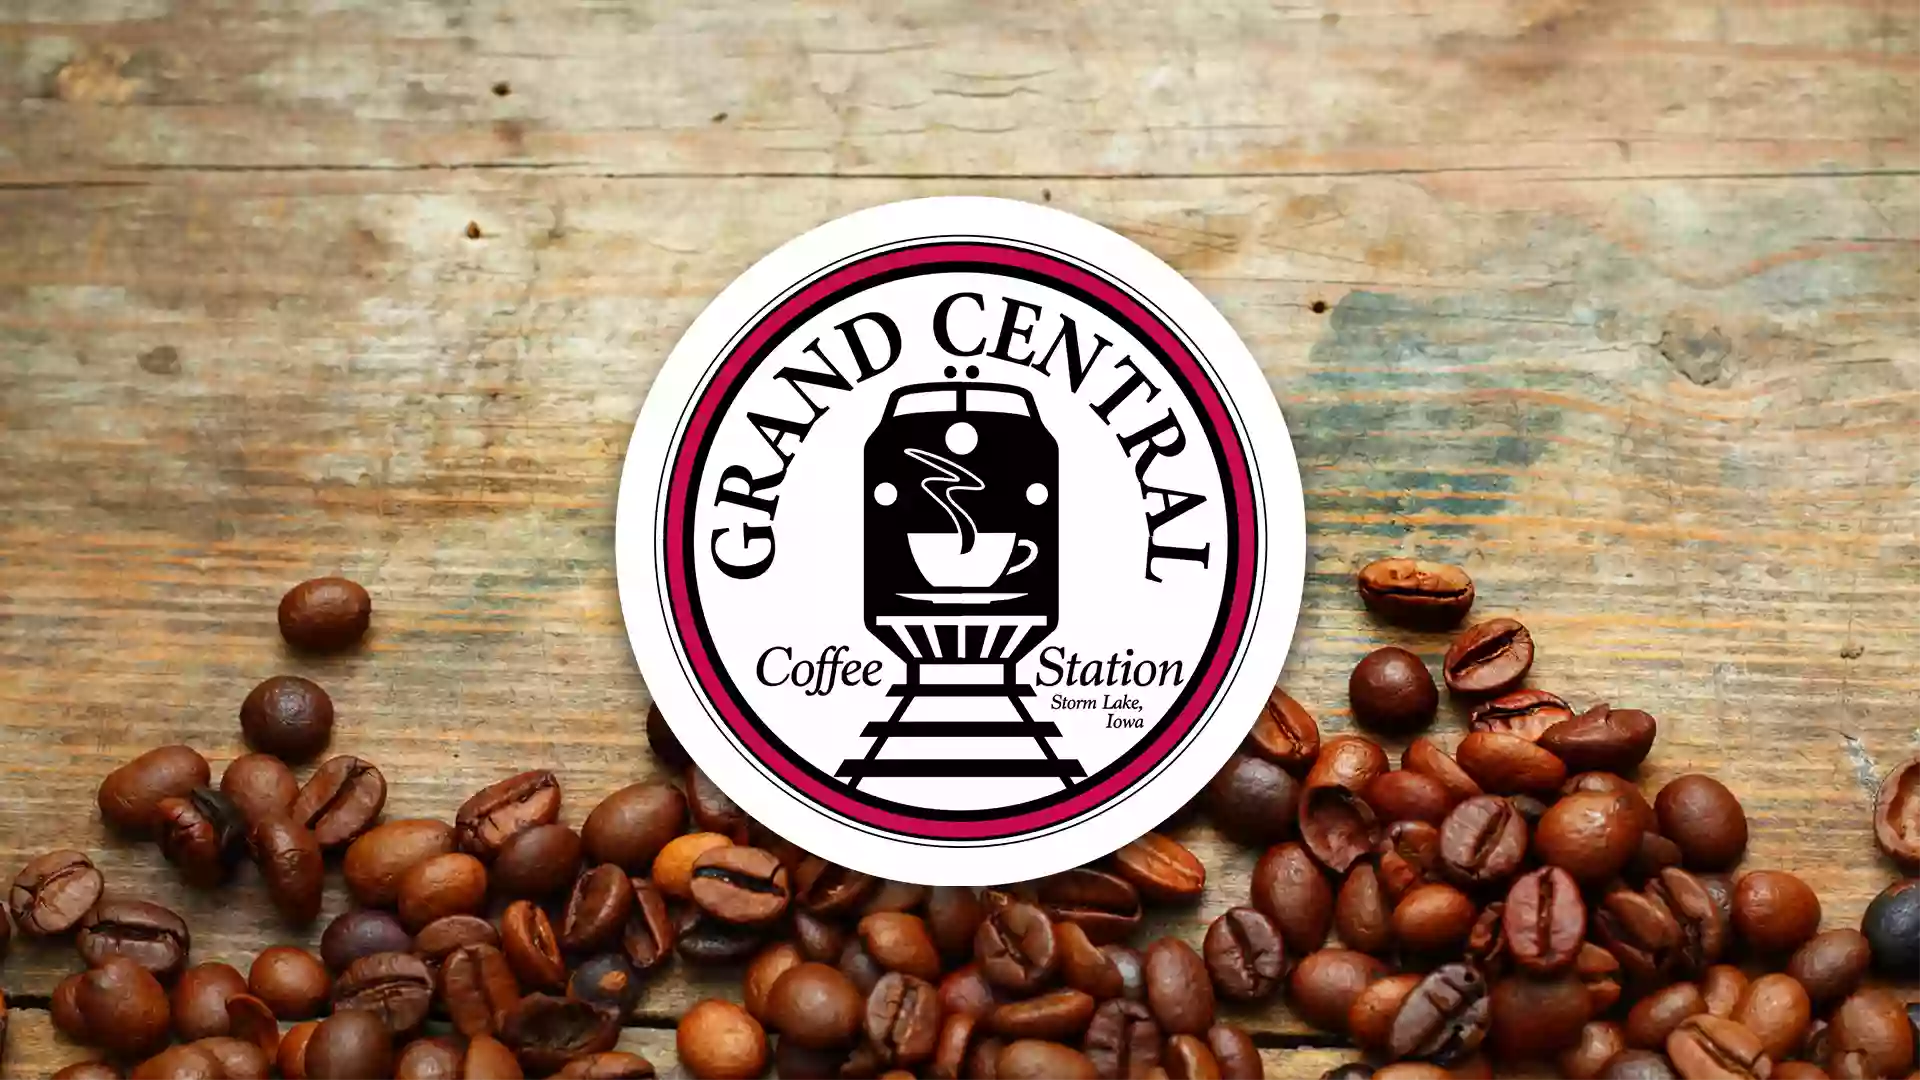 Grand Central Coffee Station